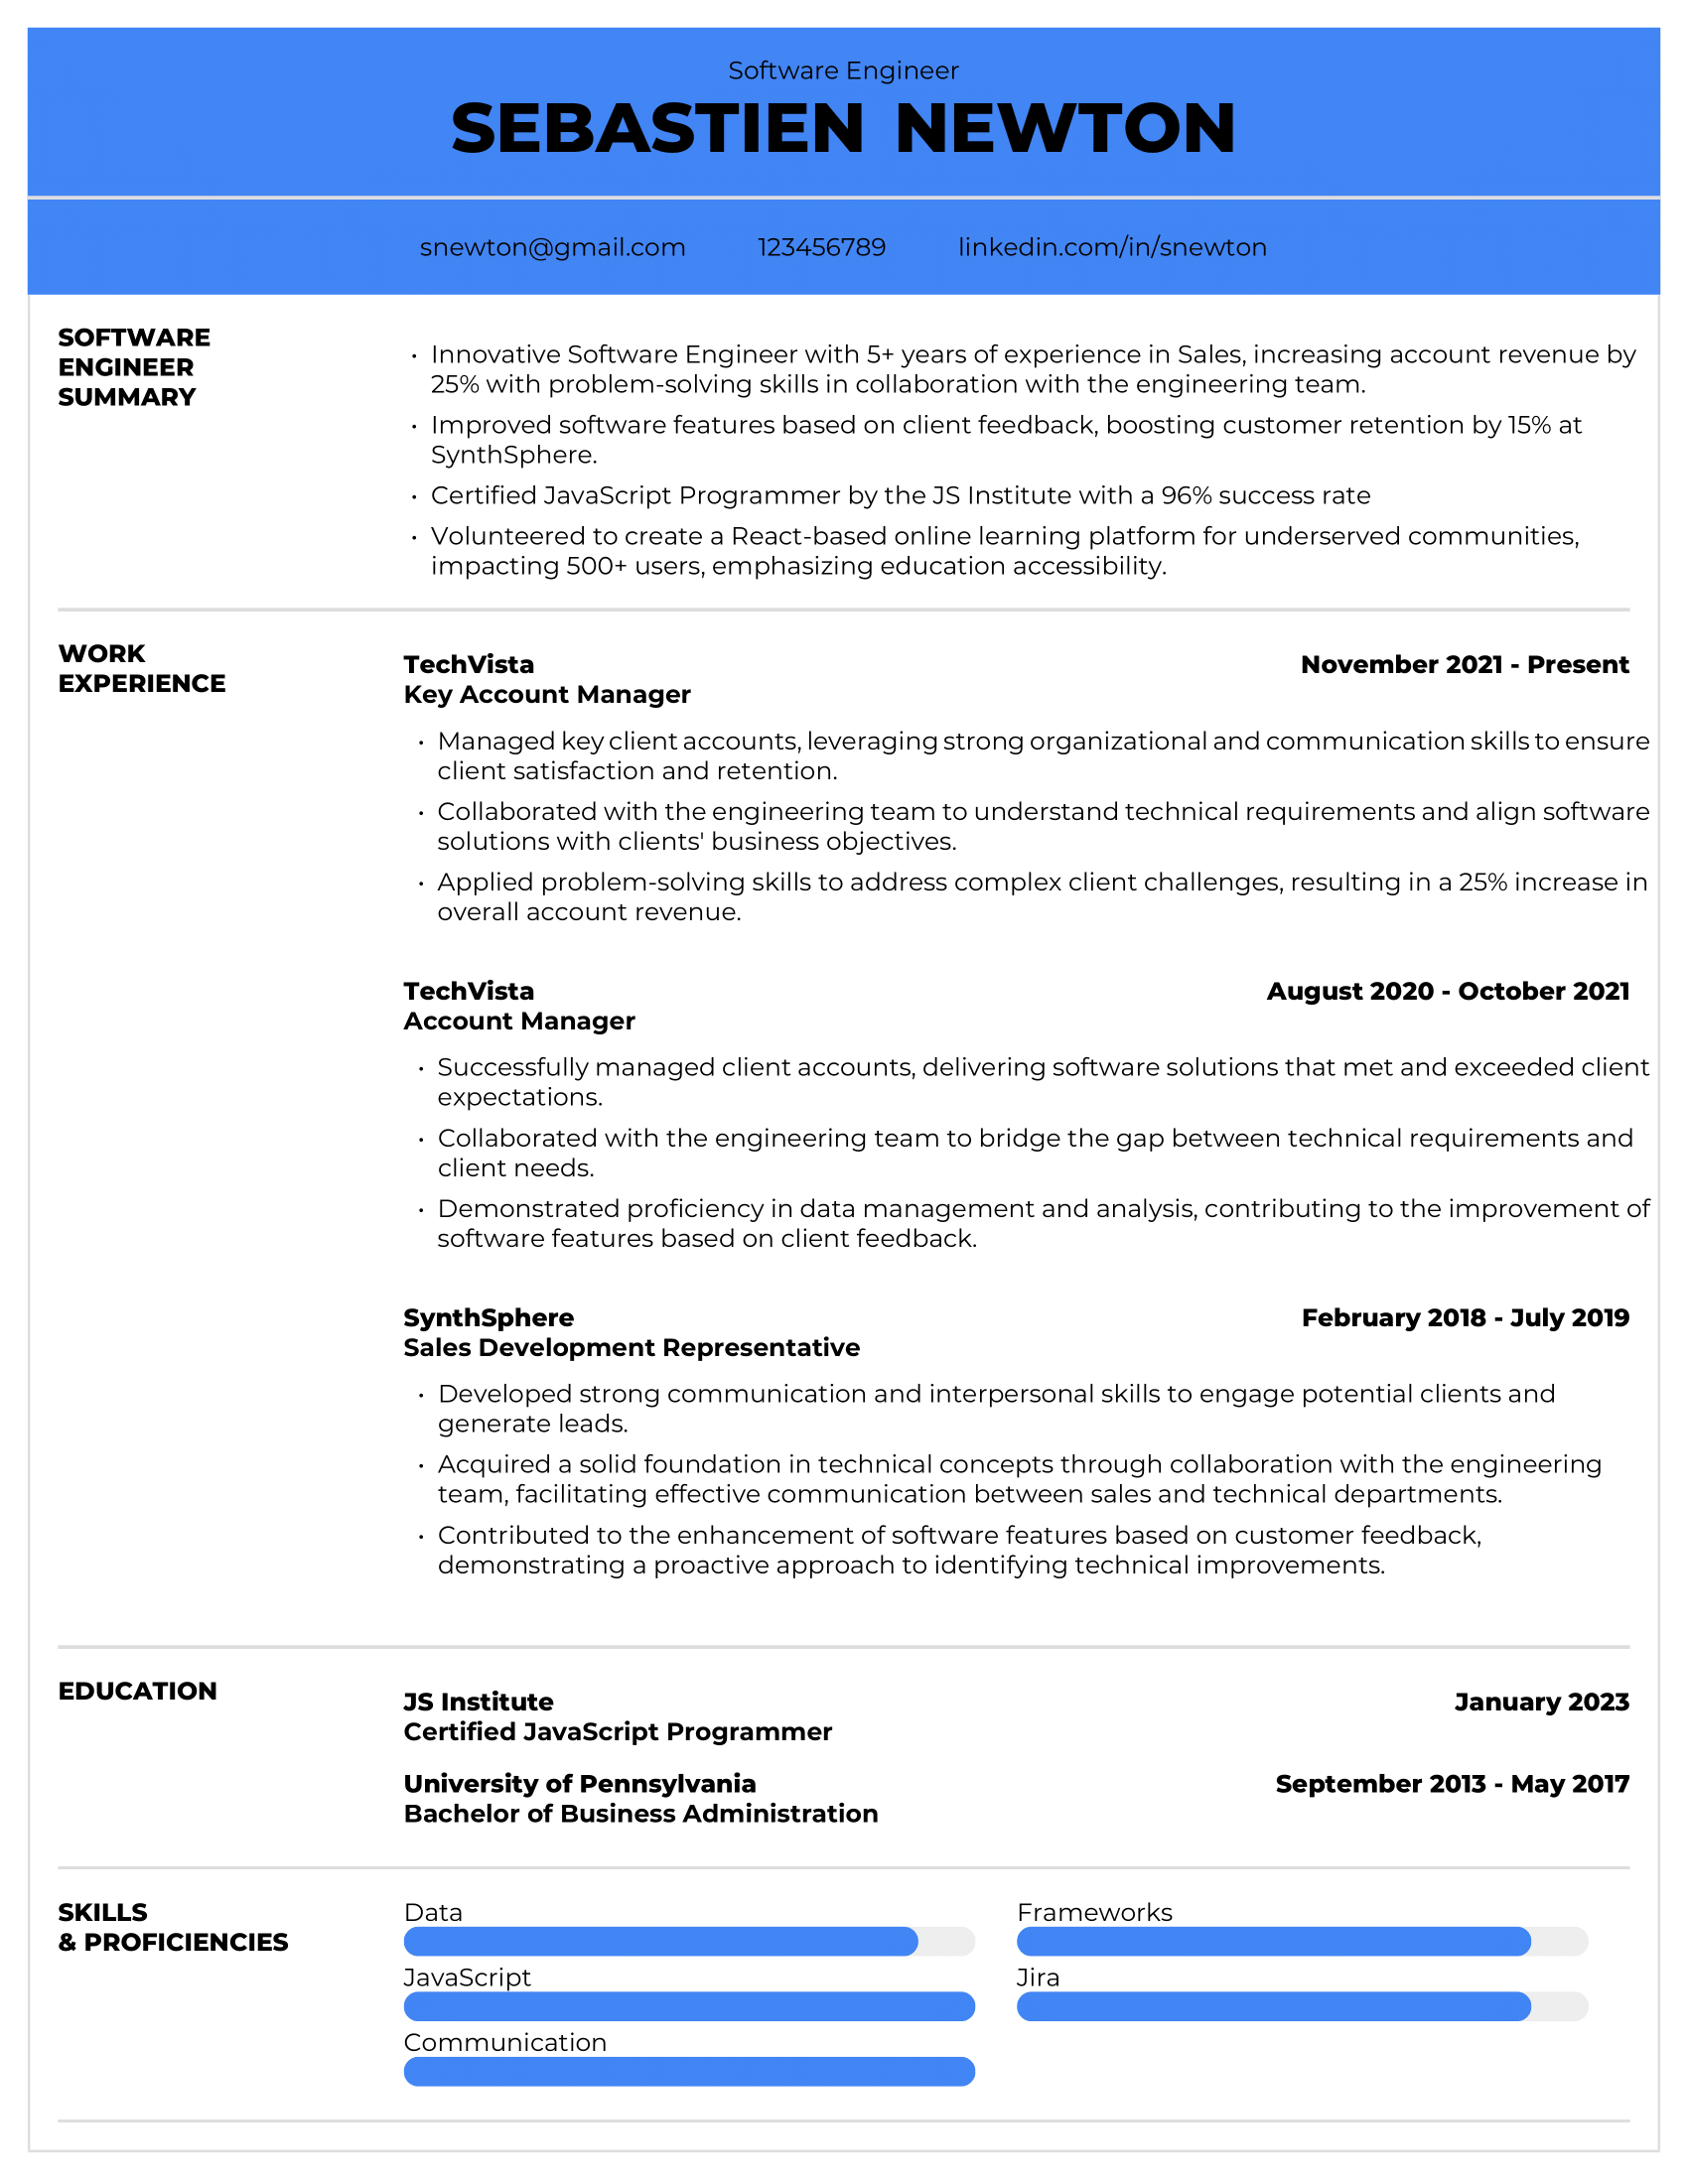 Software Engineer Resume Example #2 - Non-Traditional